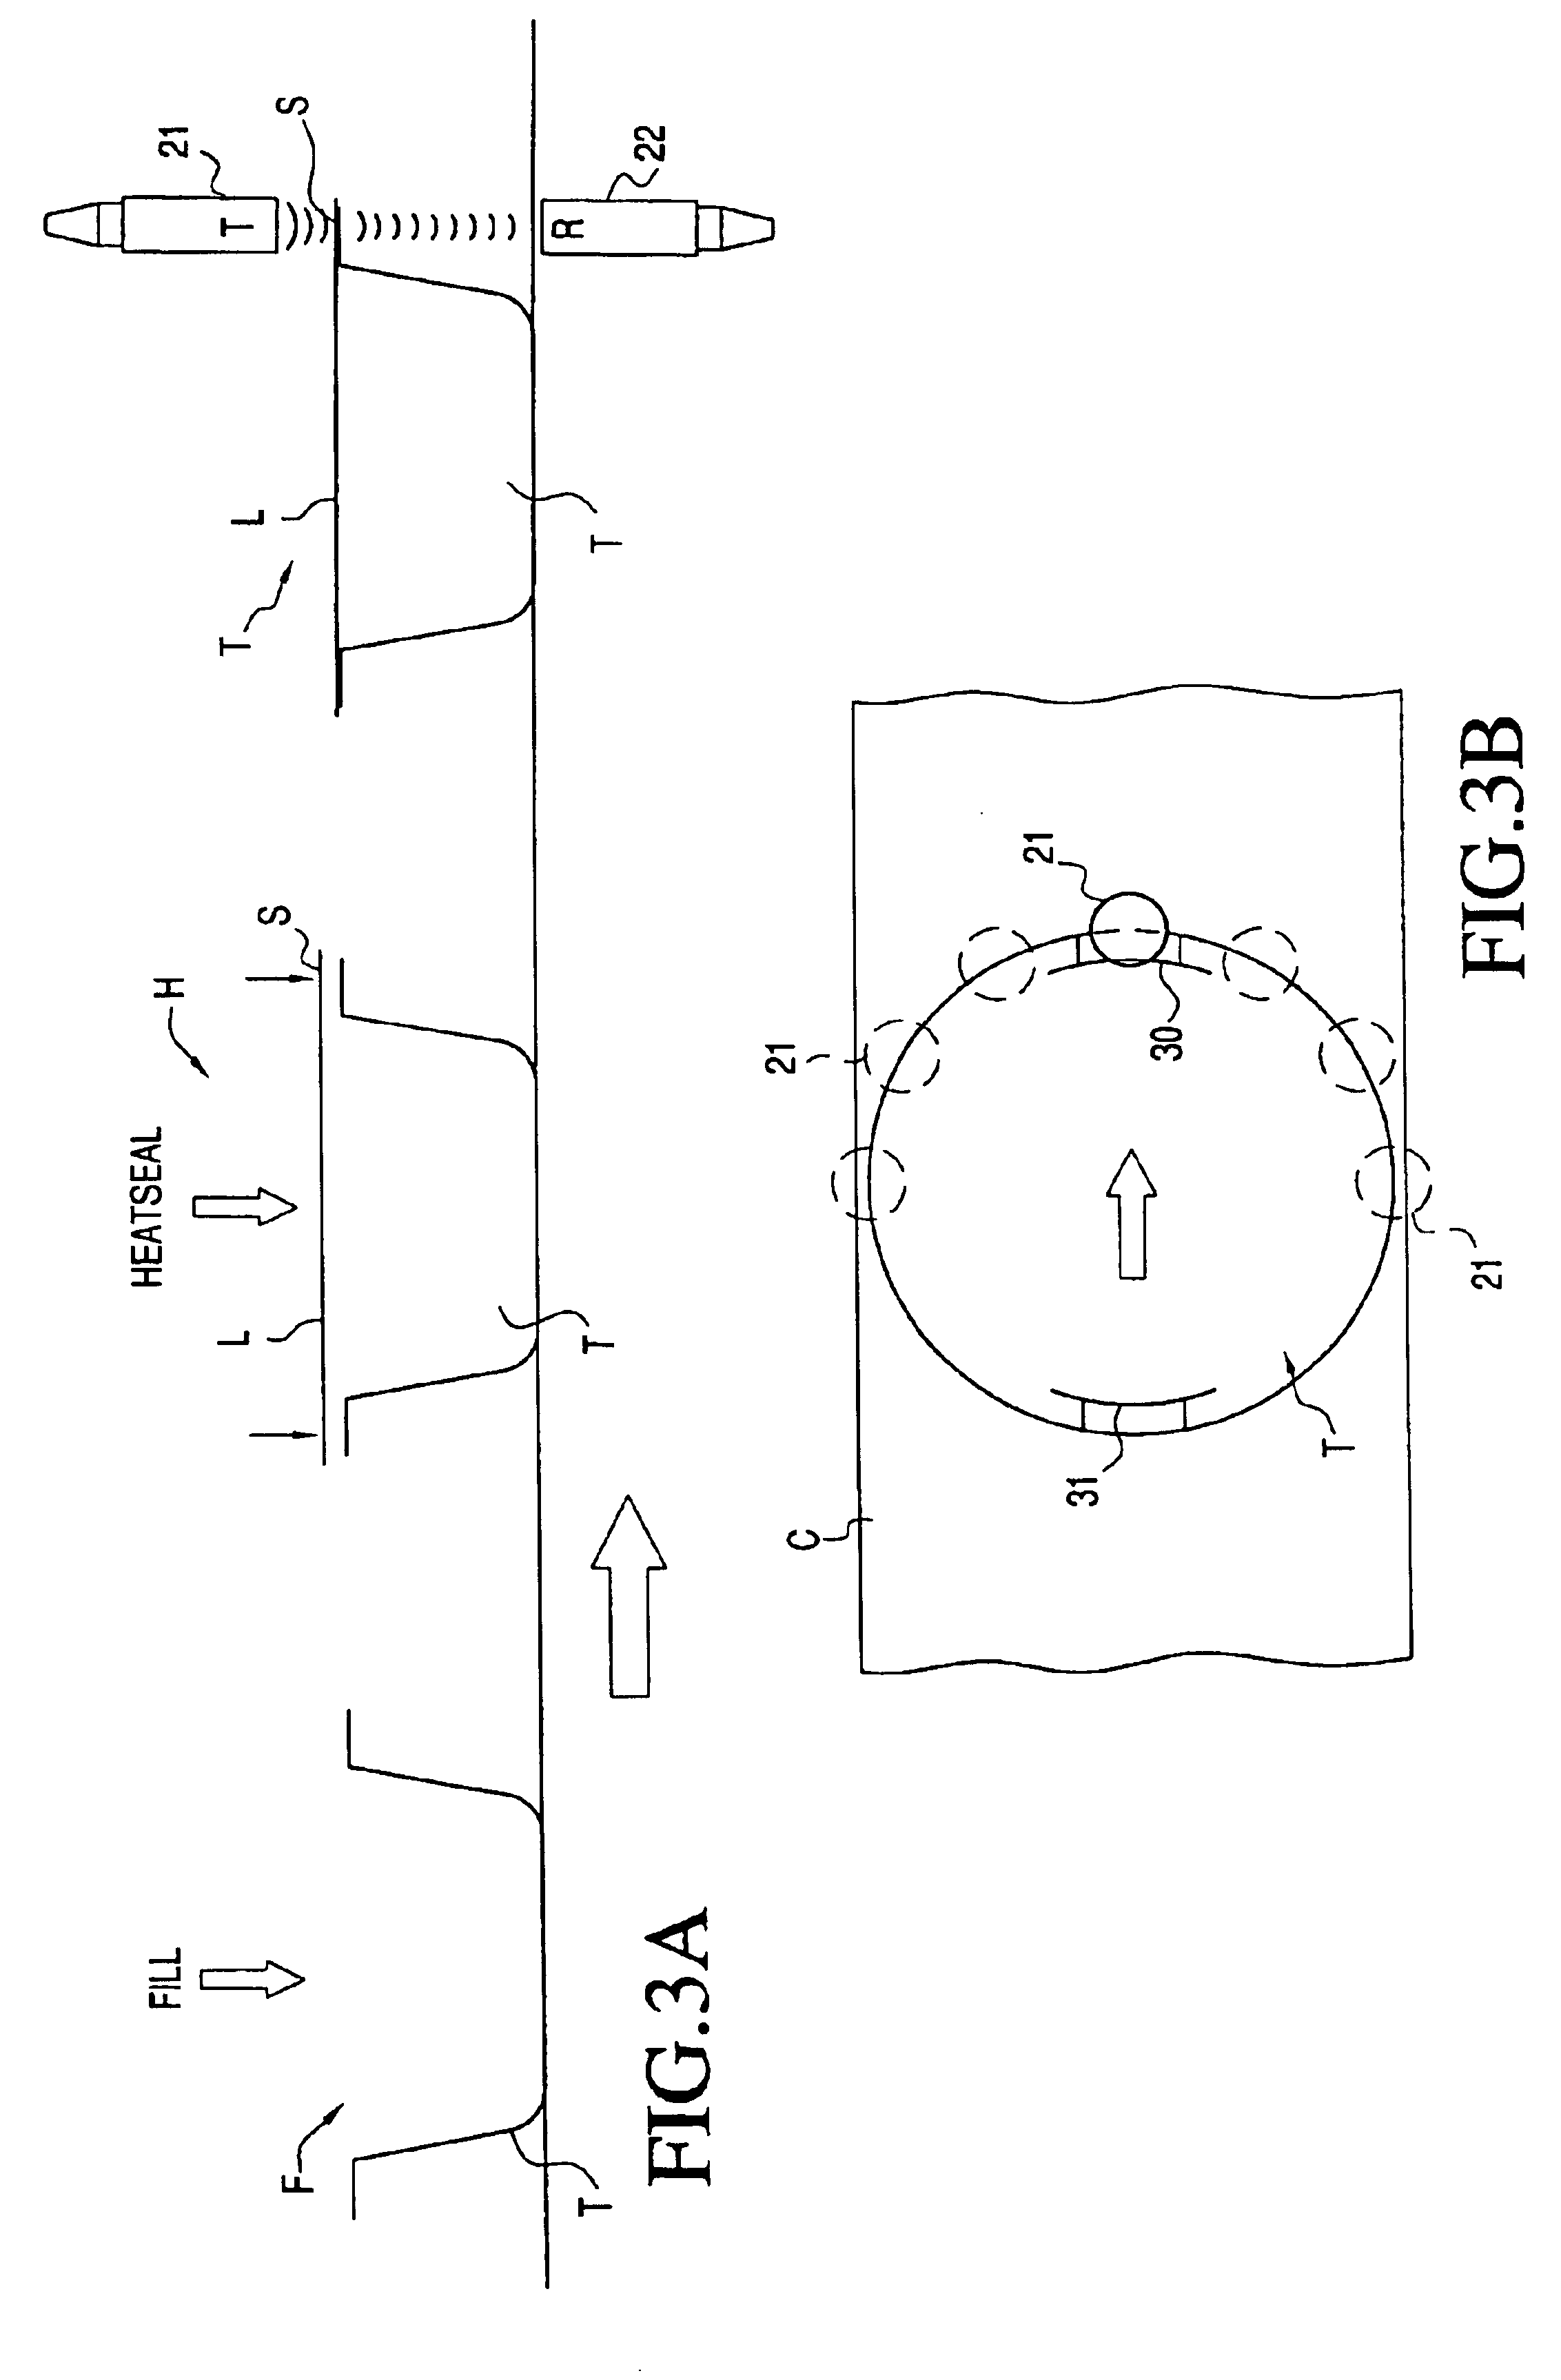 Method and apparatus for airborne ultrasonic testing of package and container seals